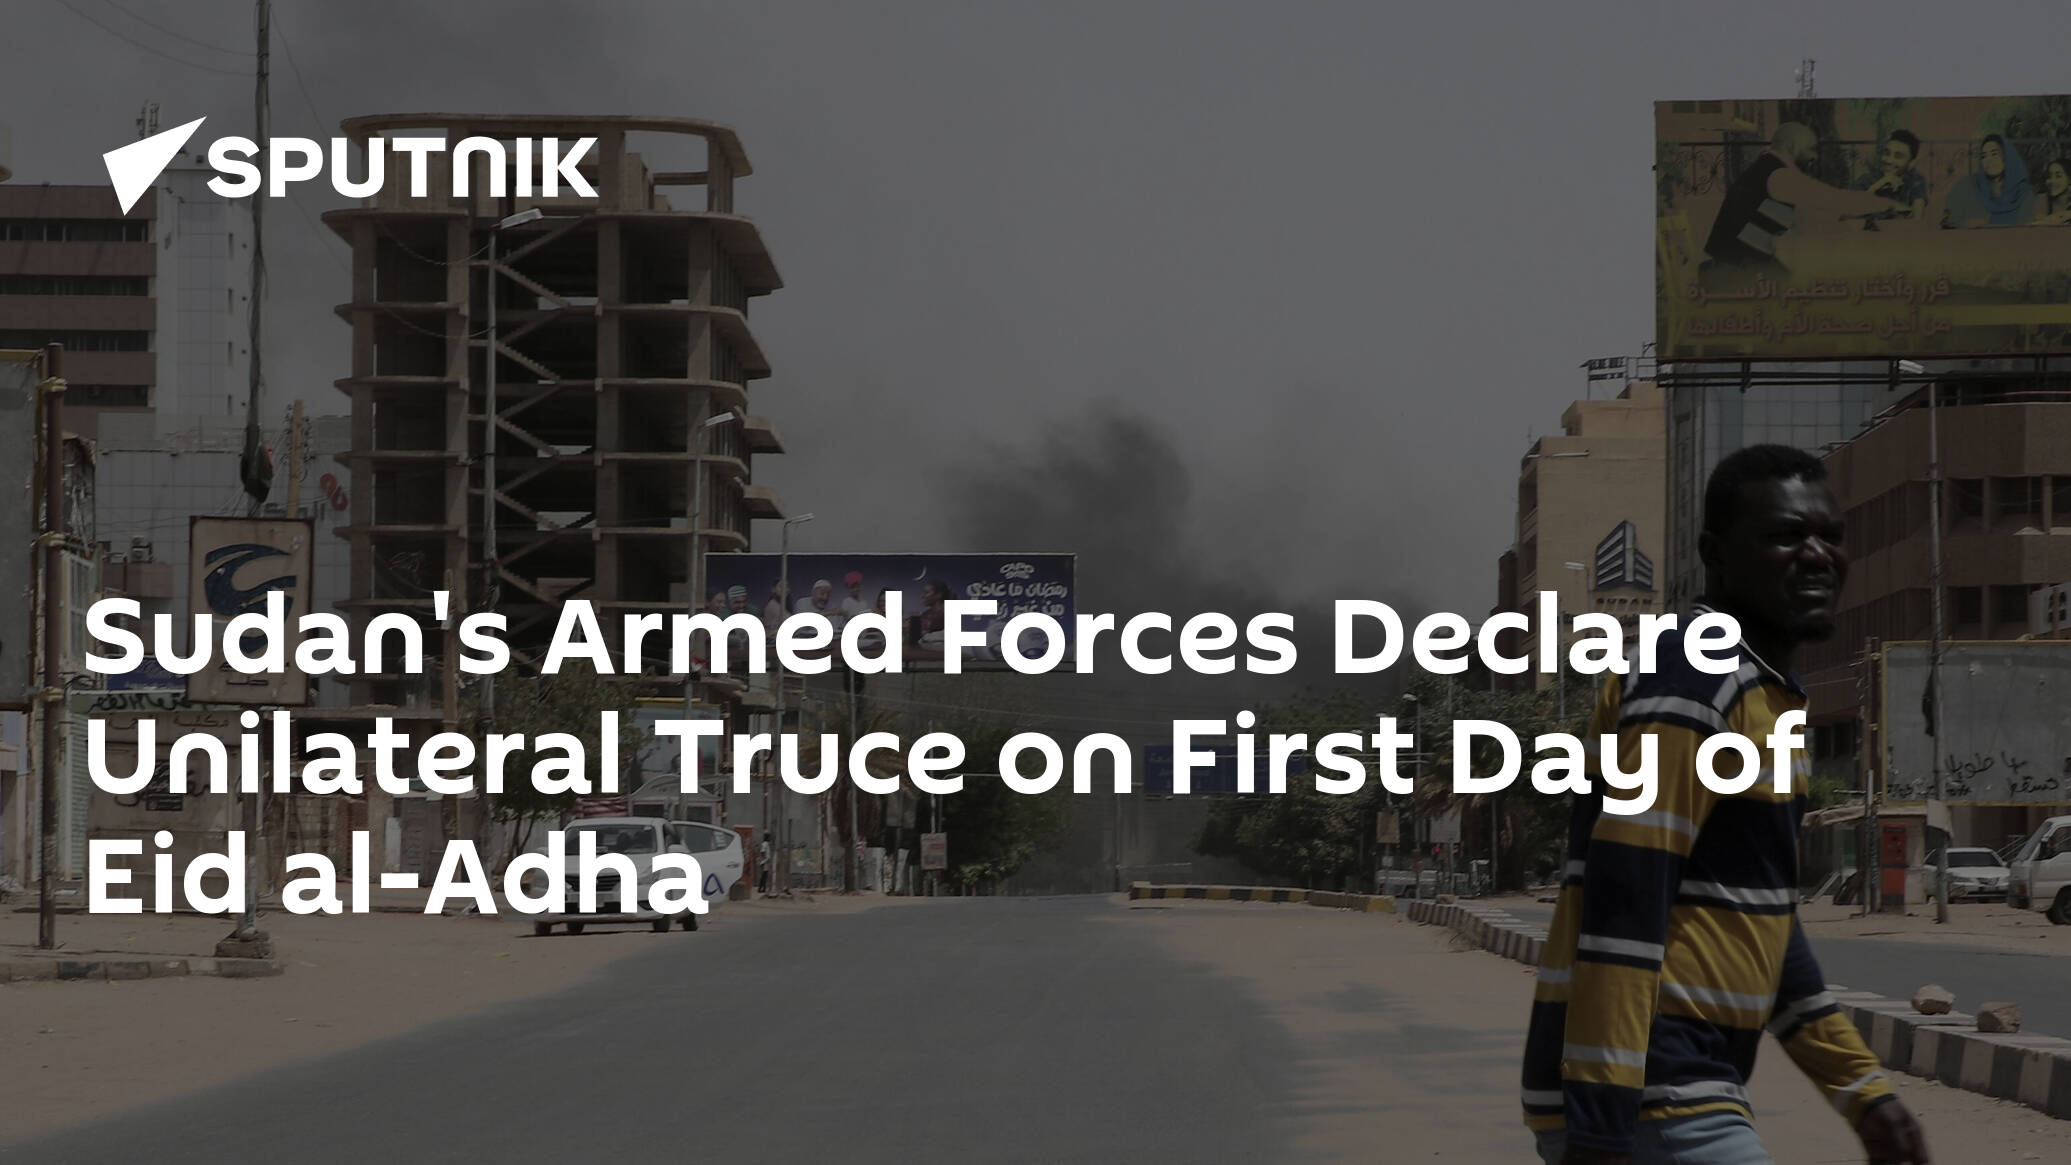 Sudan's Armed Forces Declare Unilateral Truce on First Day of Eid al-Adha